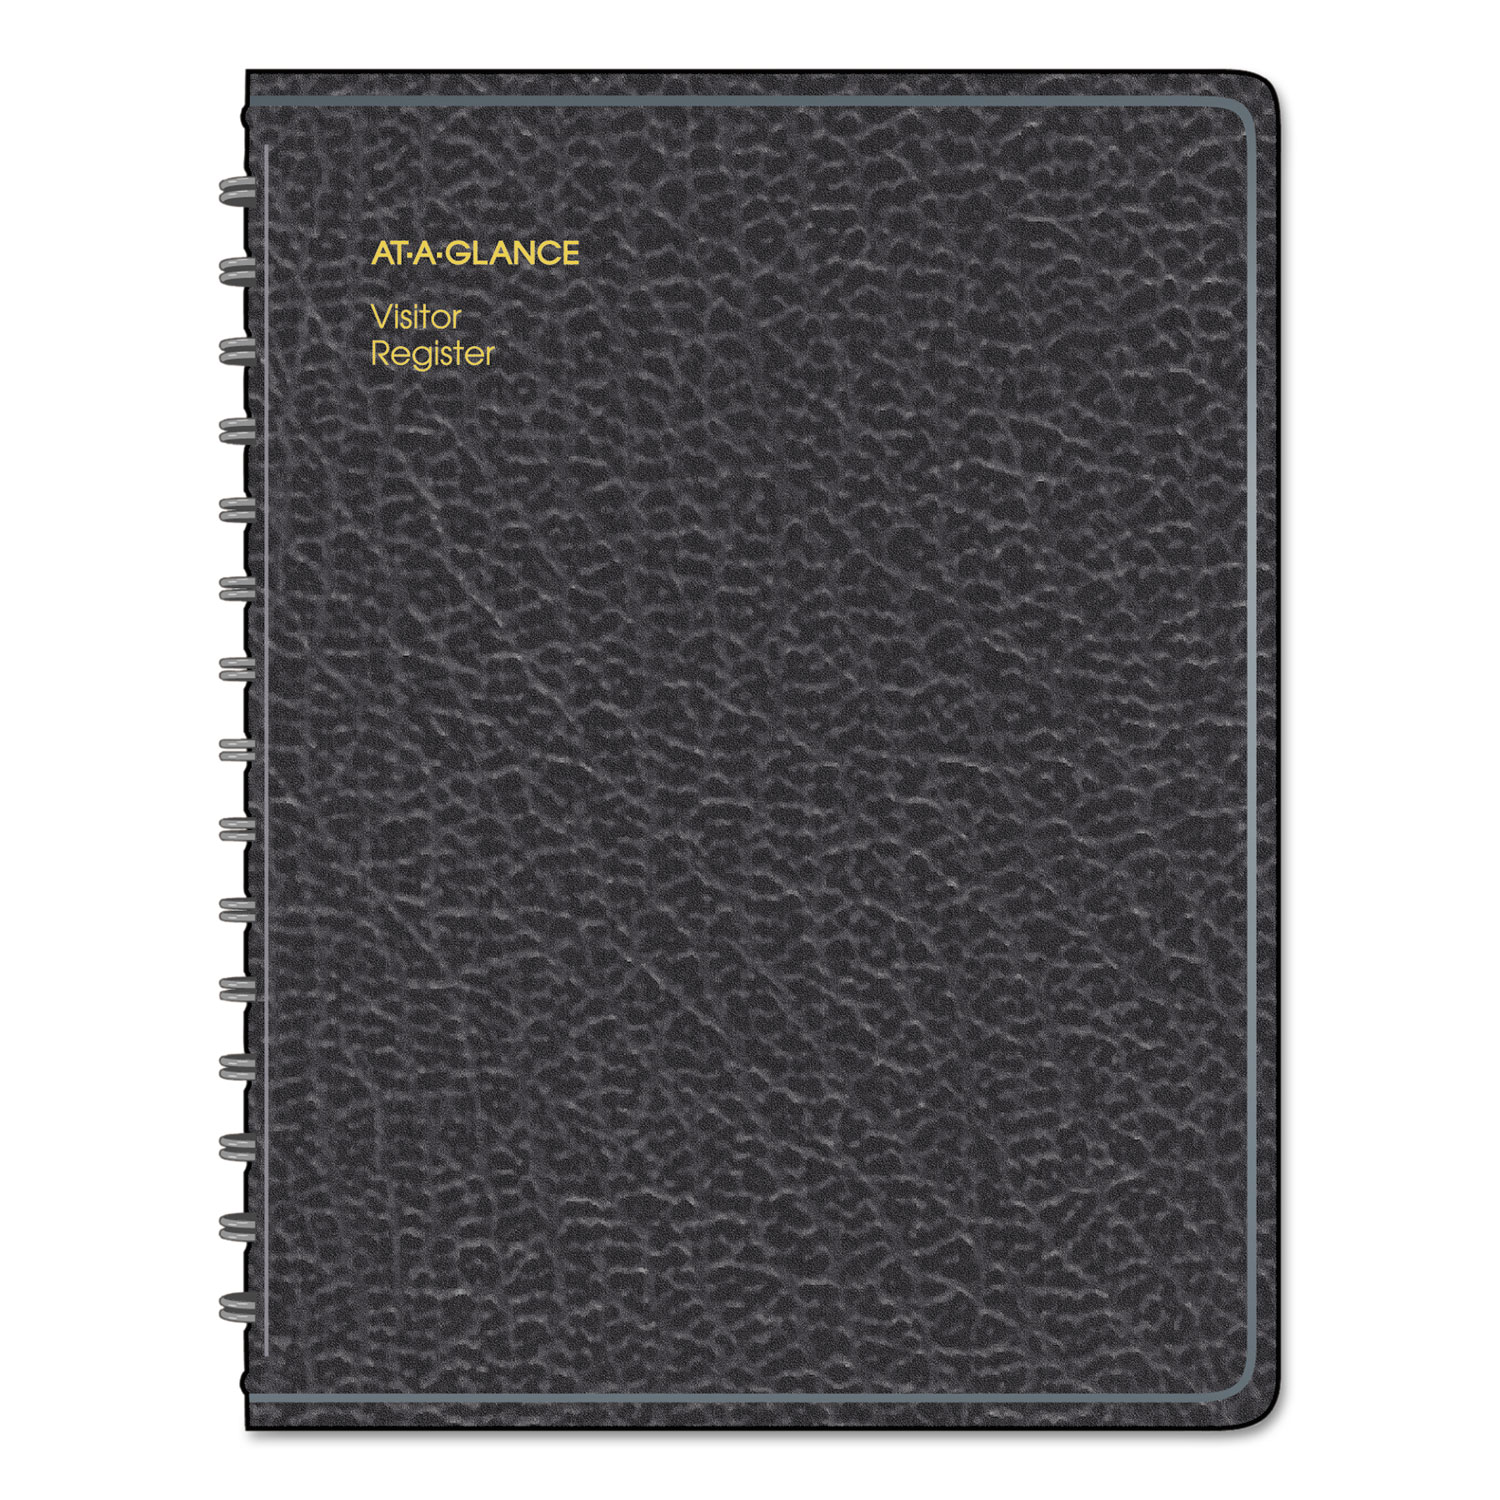 Recycled Visitor Register Book, Black, 8 1/2 x 11